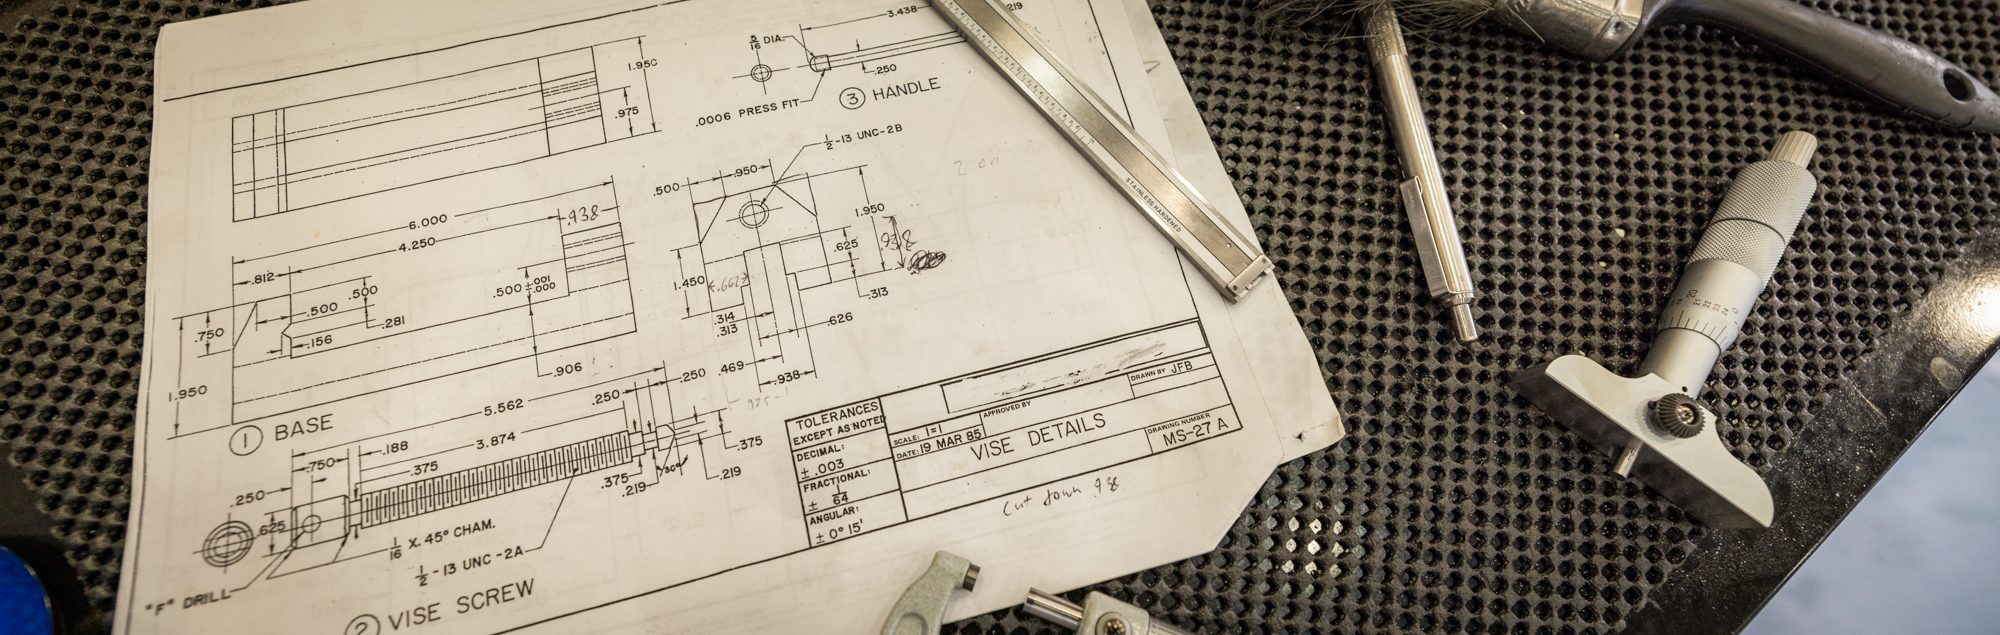 electrical schematics and tools on a table